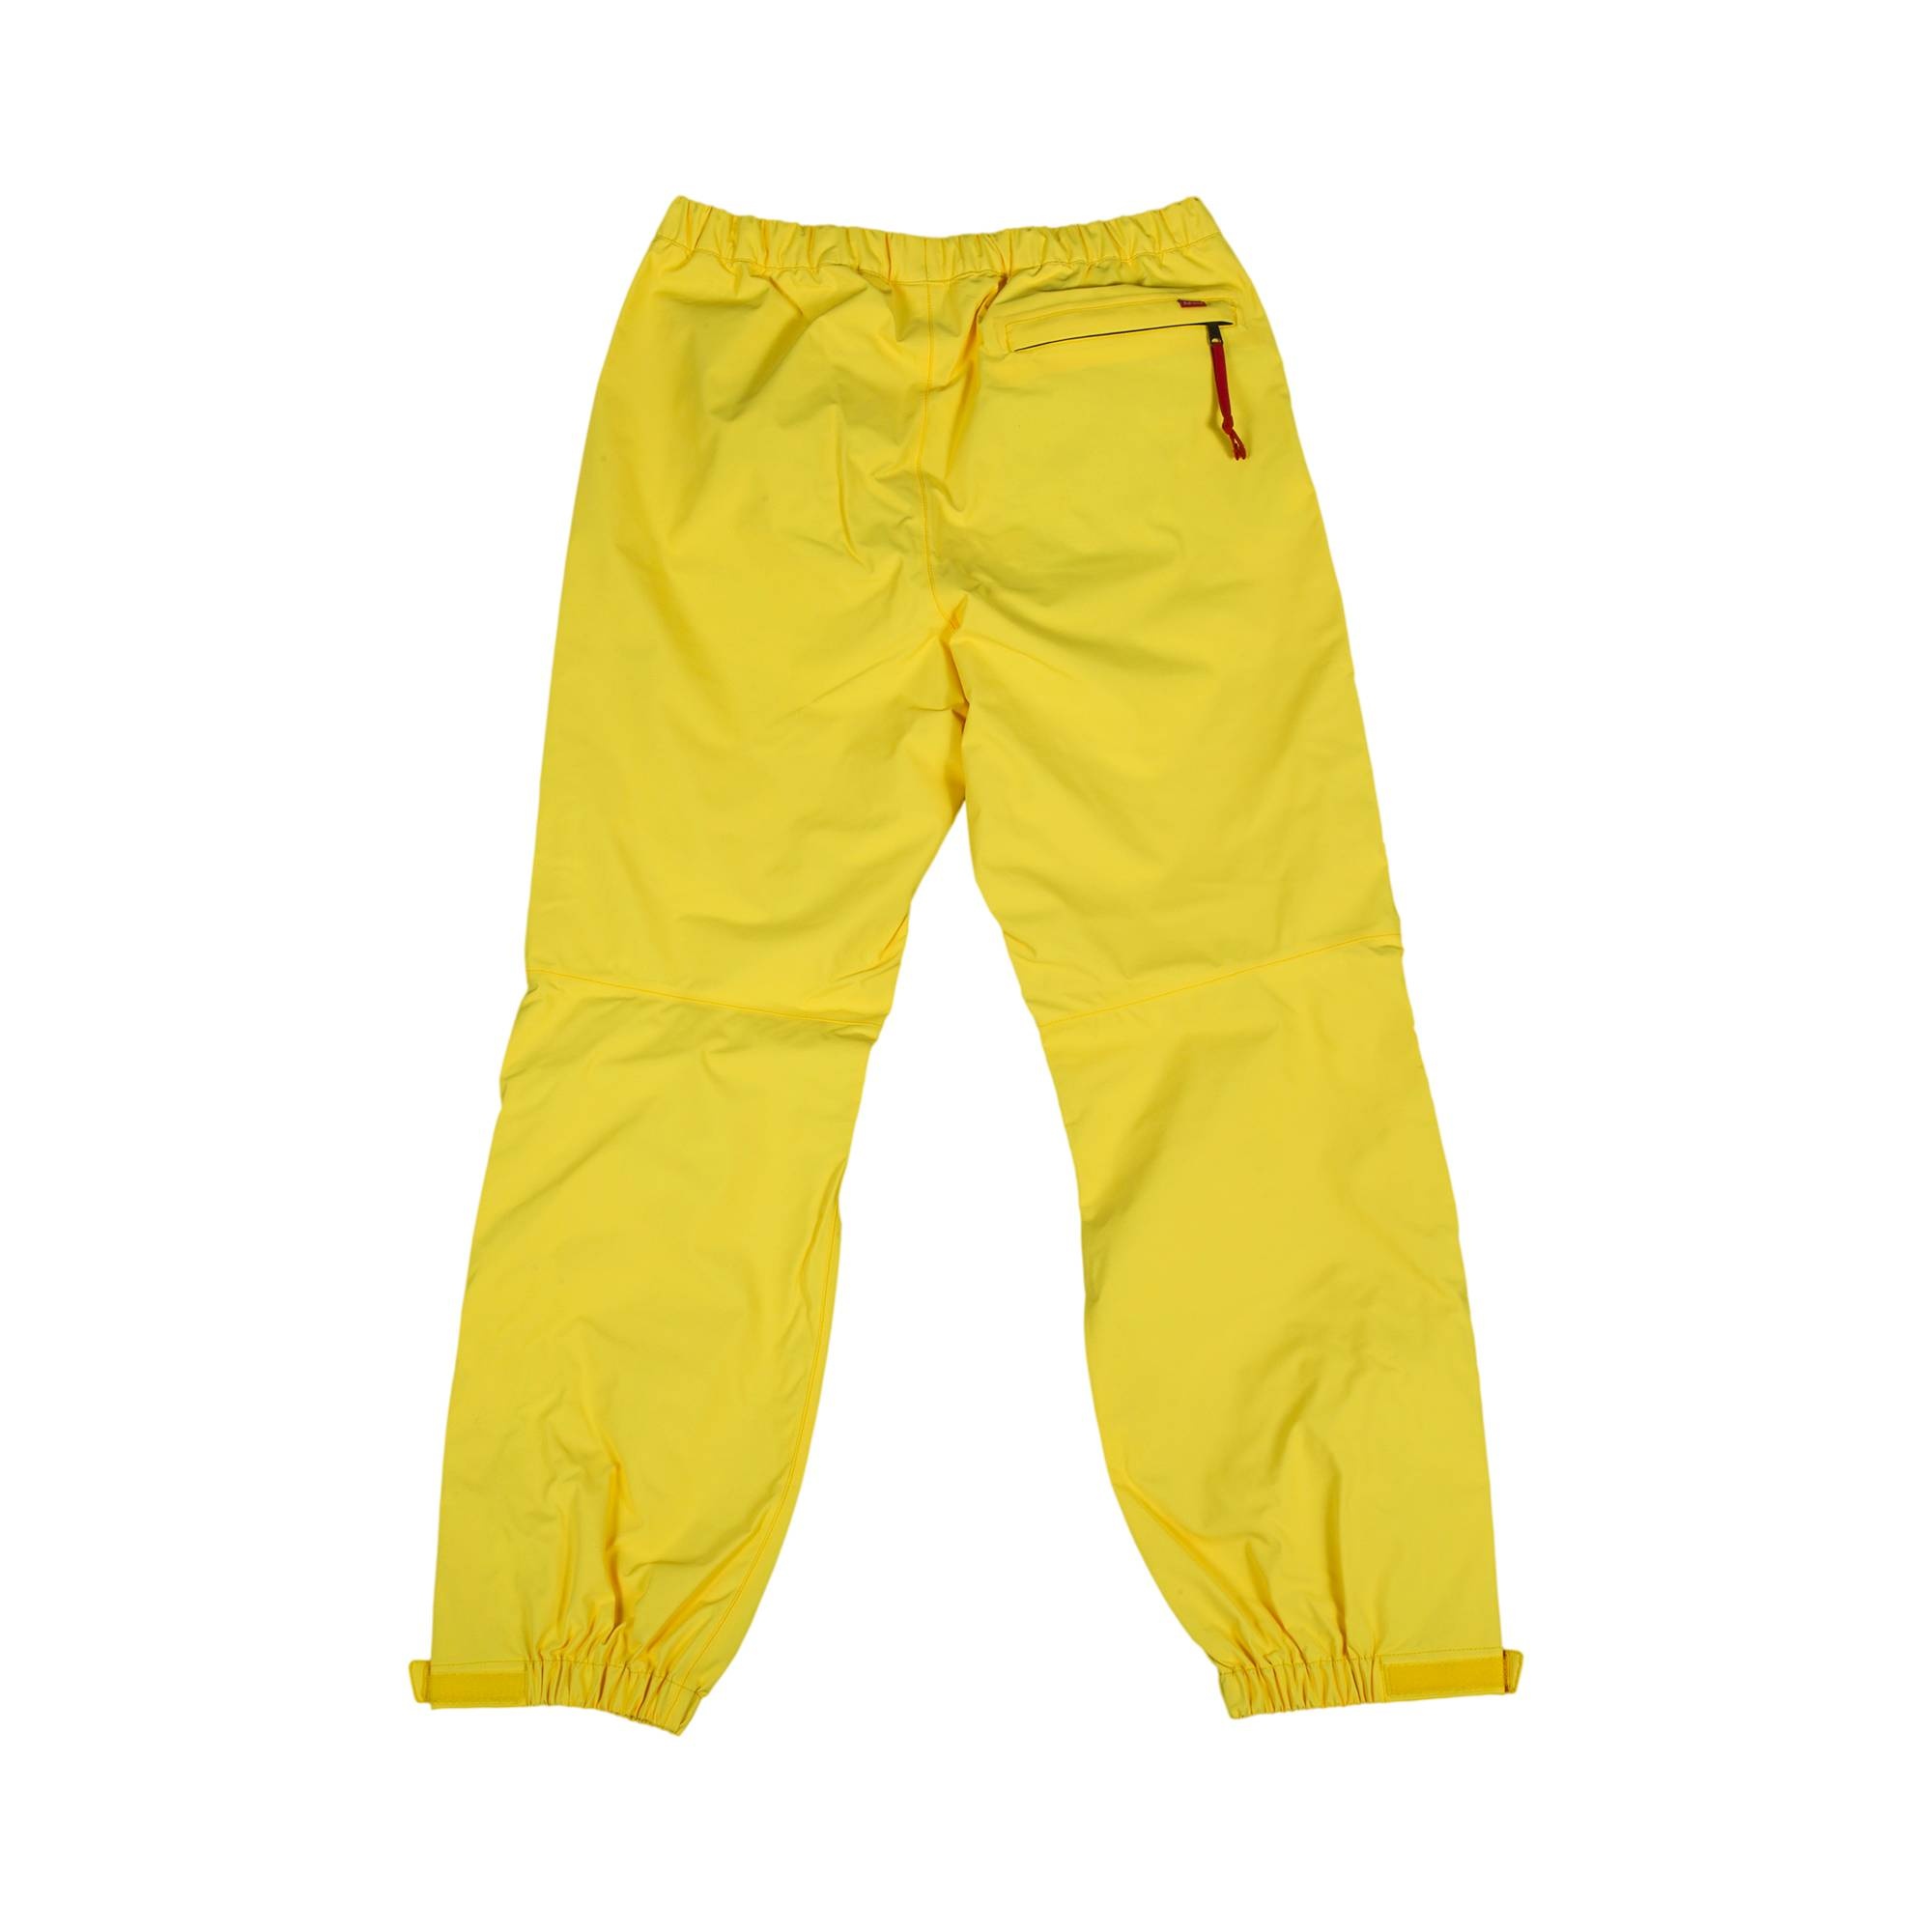 Supreme x The North Face Trans Antarctica Expedition Pant 'Yellow' - 2